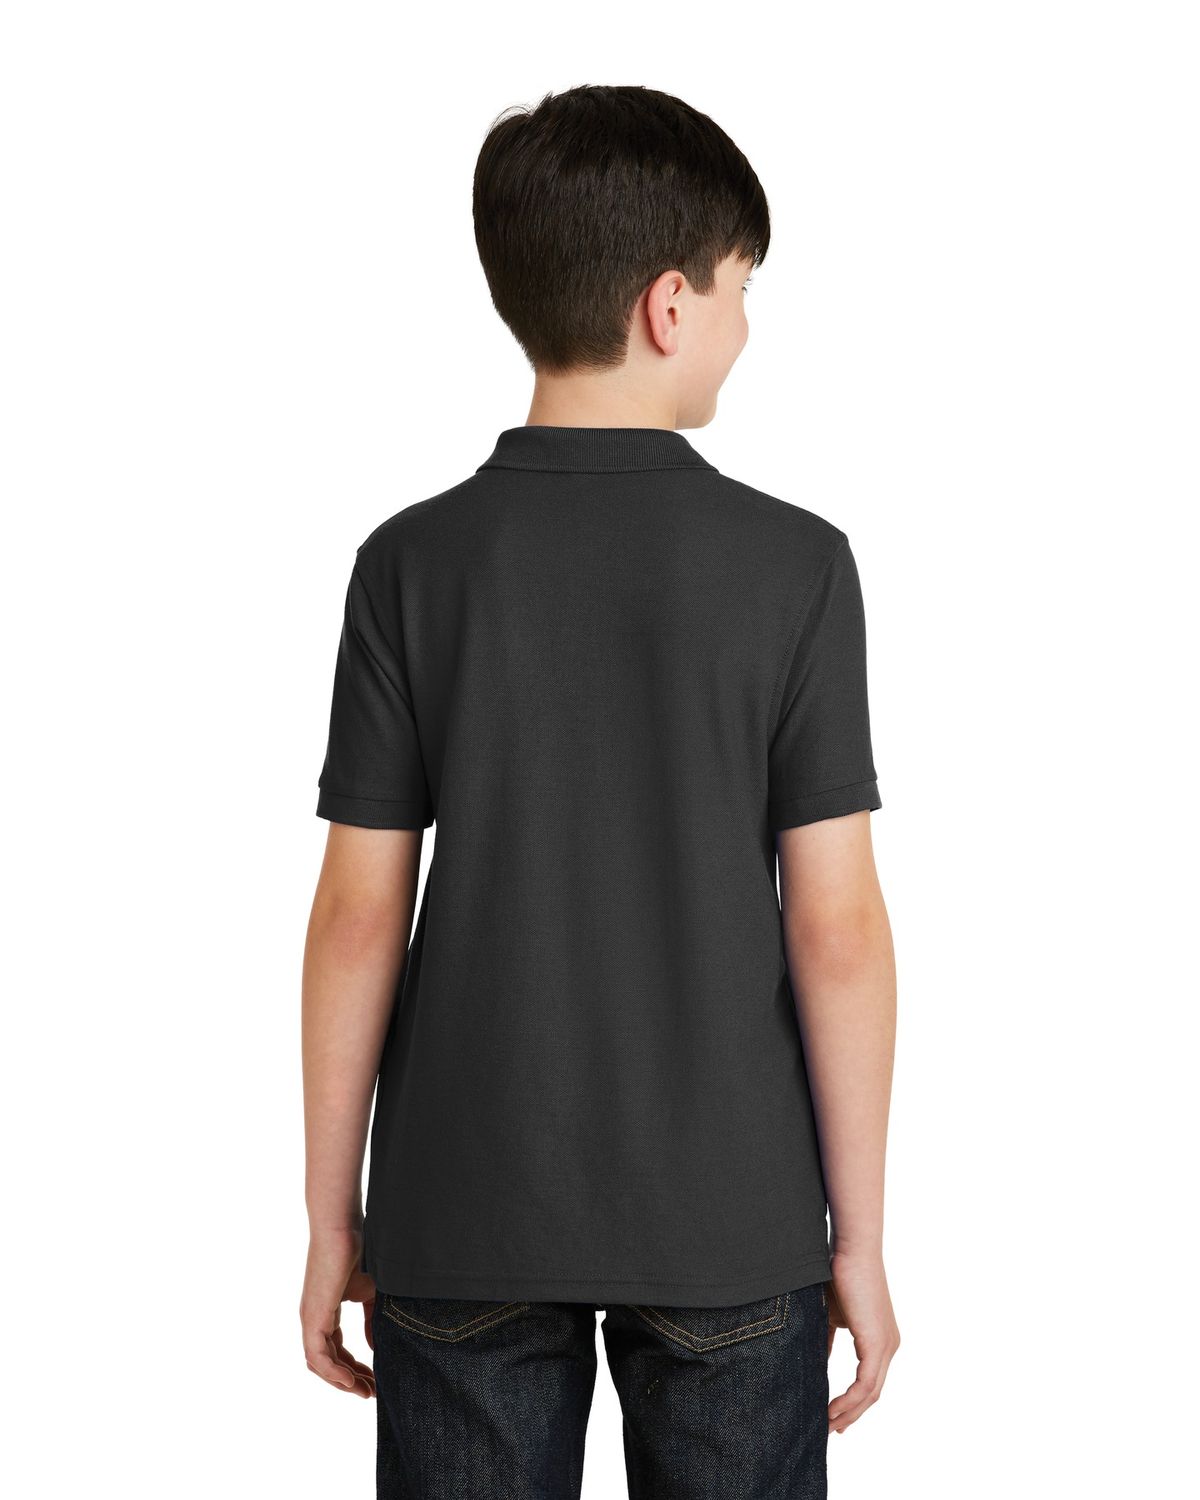 'Port Authority Y500 Youth Silk Touch Polo-shirt'